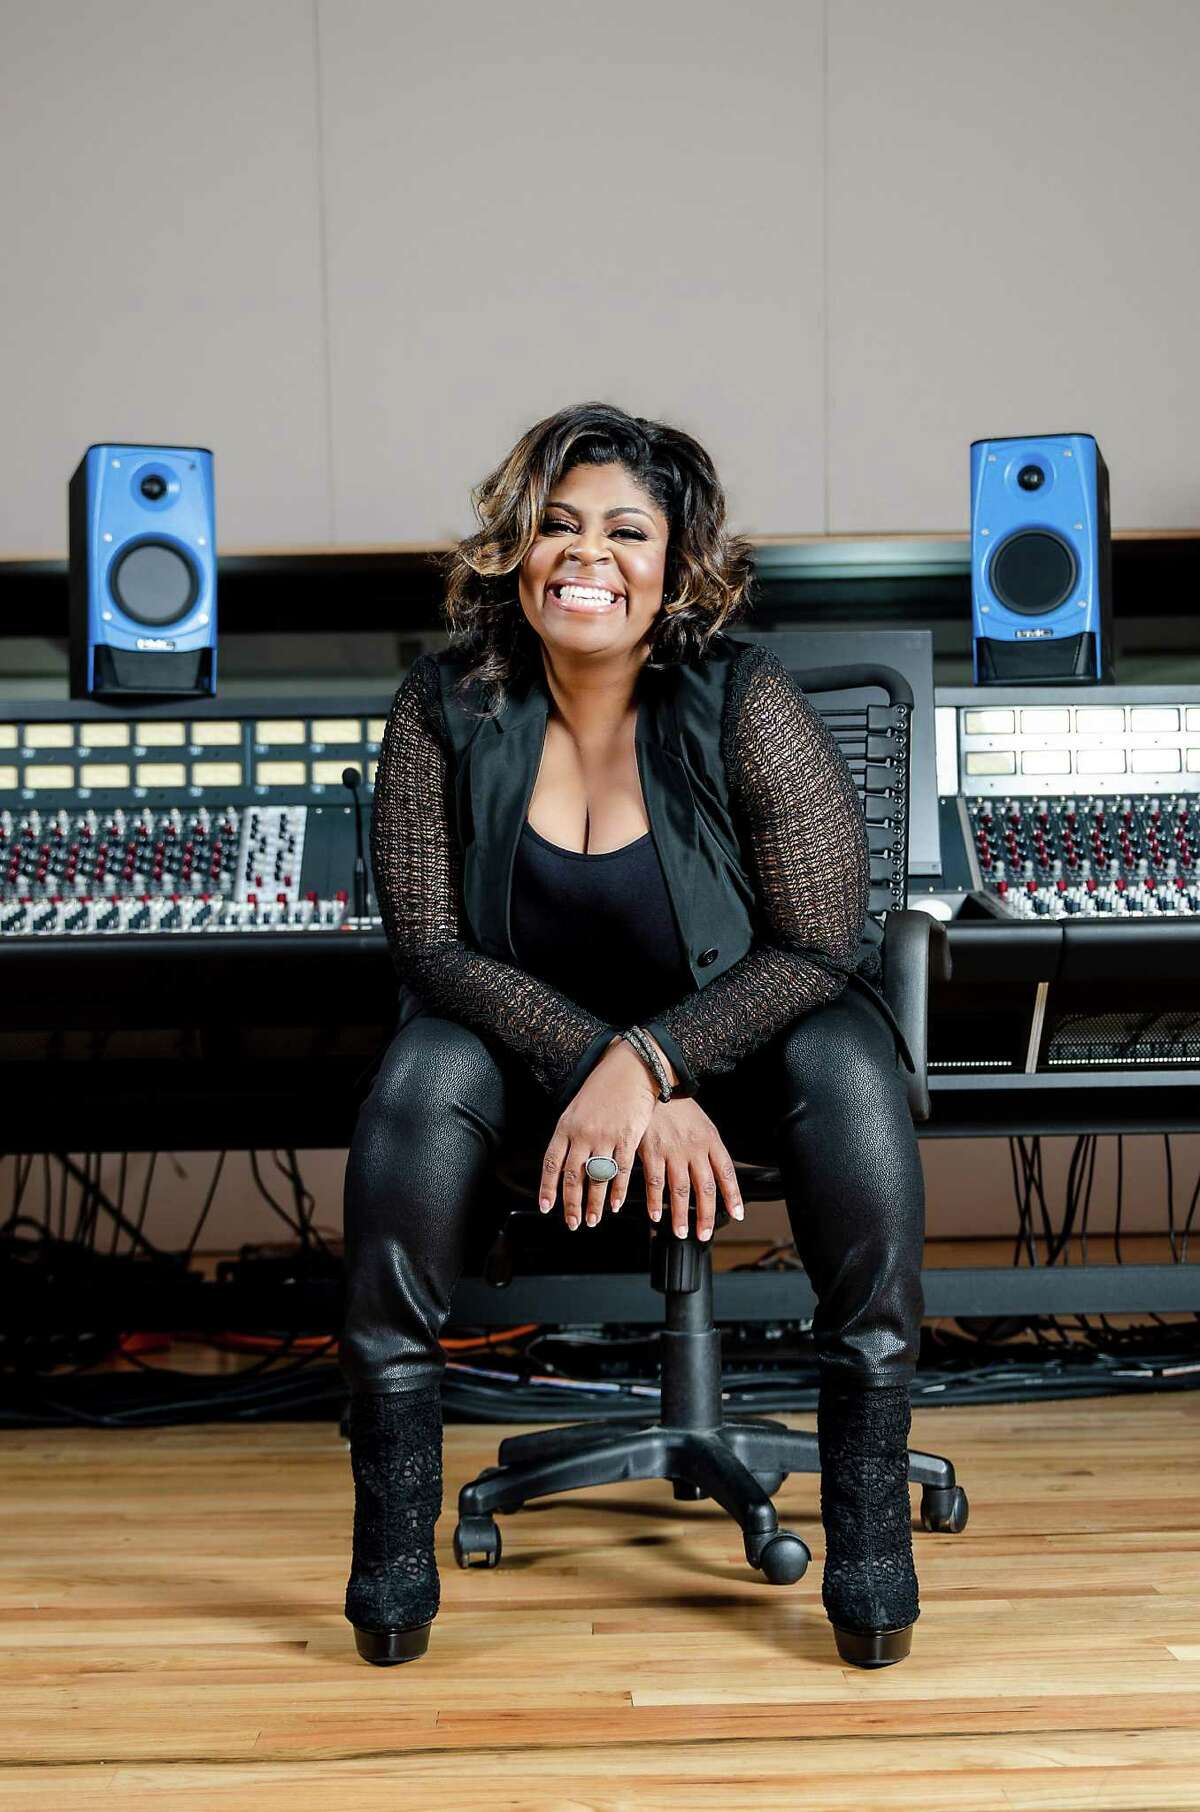 TSU has reportedly canceled gospel singer Kim Burrell's radio show after her anti-gay comments spread online.